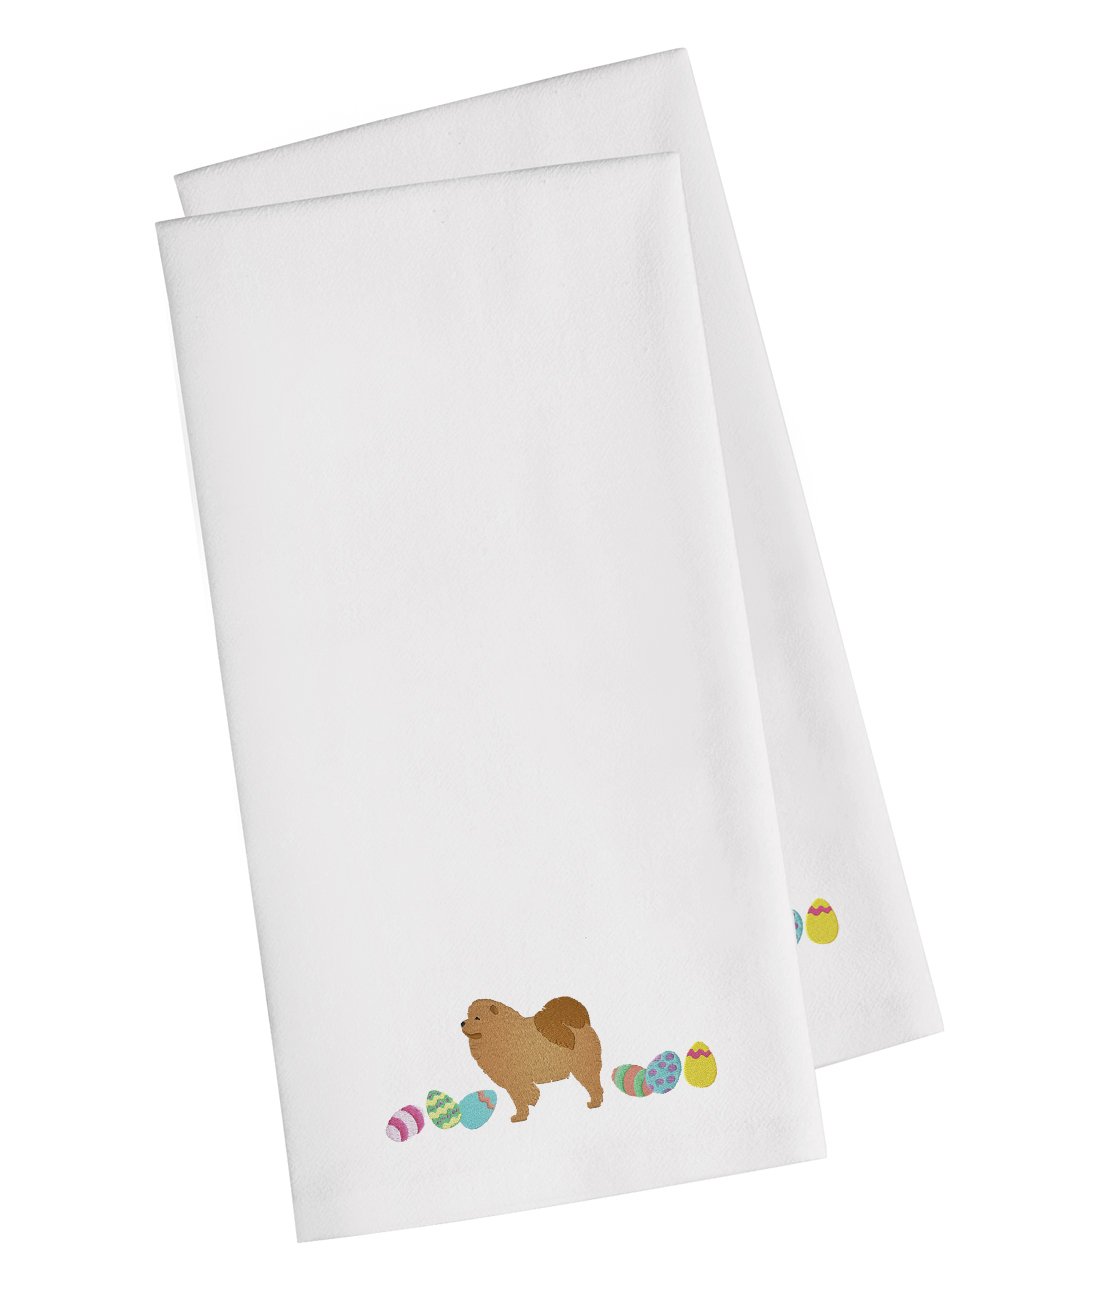 Chow Chow Easter White Embroidered Kitchen Towel Set of 2 CK1626WHTWE by Caroline's Treasures